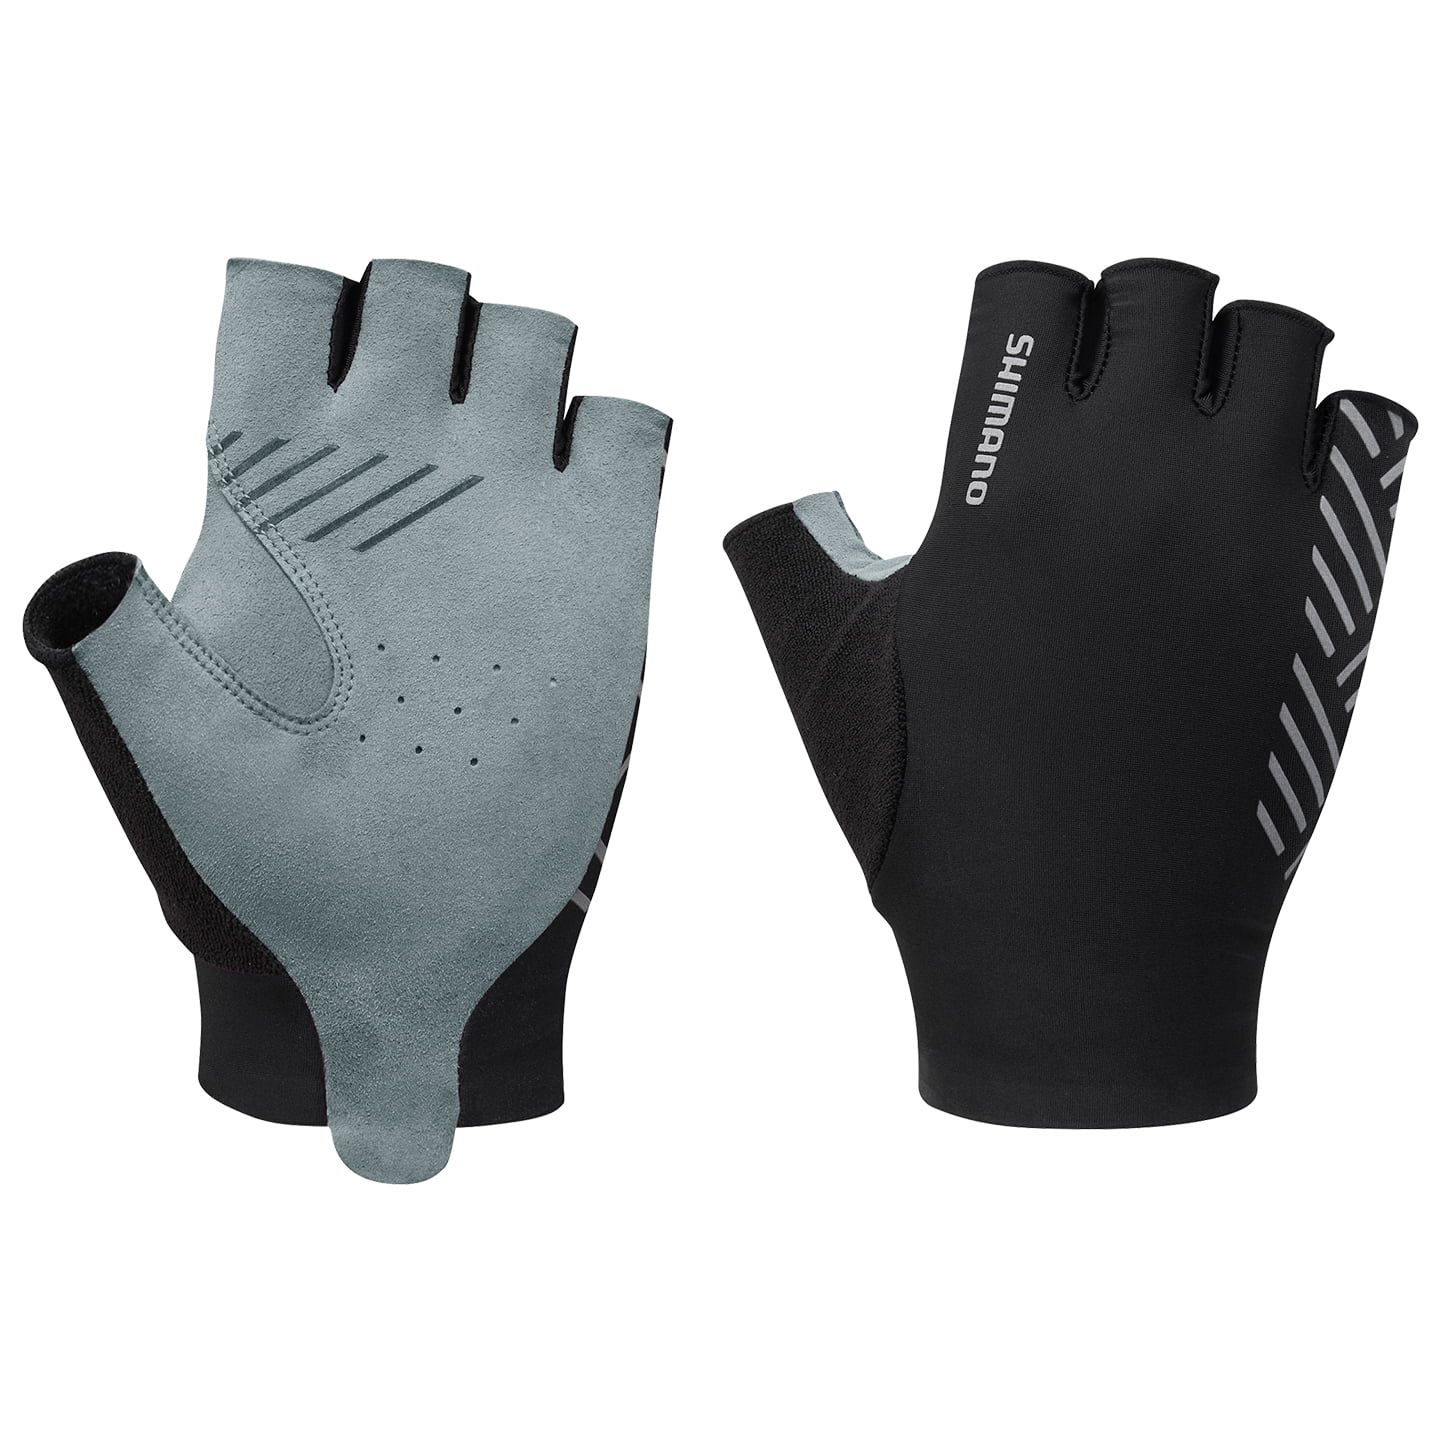 Advanced Gloves Cycling Gloves, for men, size L, Cycling gloves, Bike gear